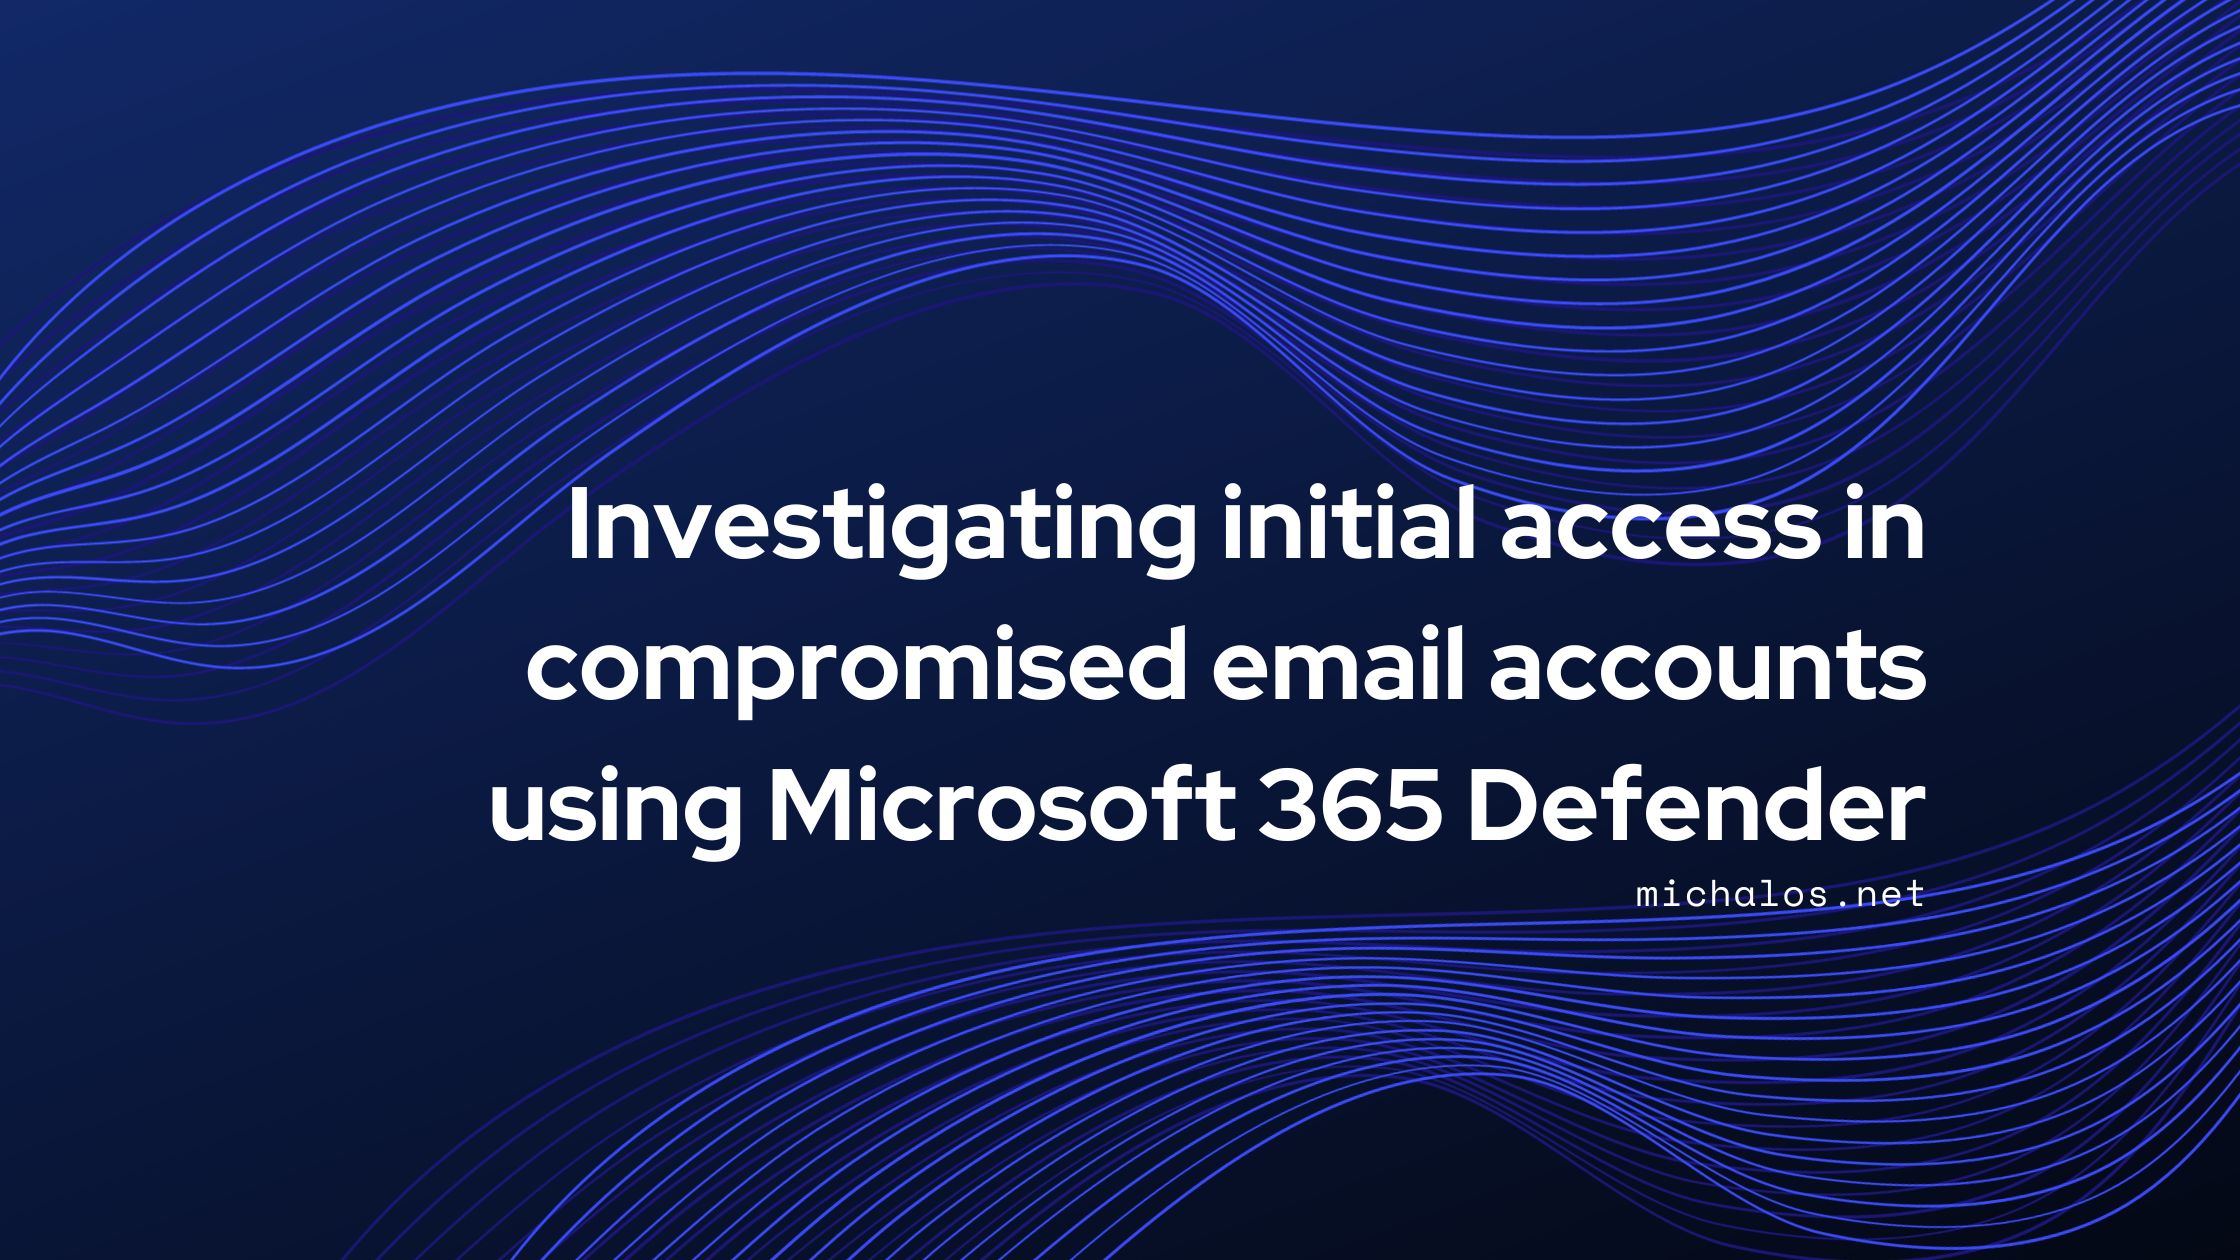 Investigating initial access in compromised email accounts using Microsoft 365 Defender